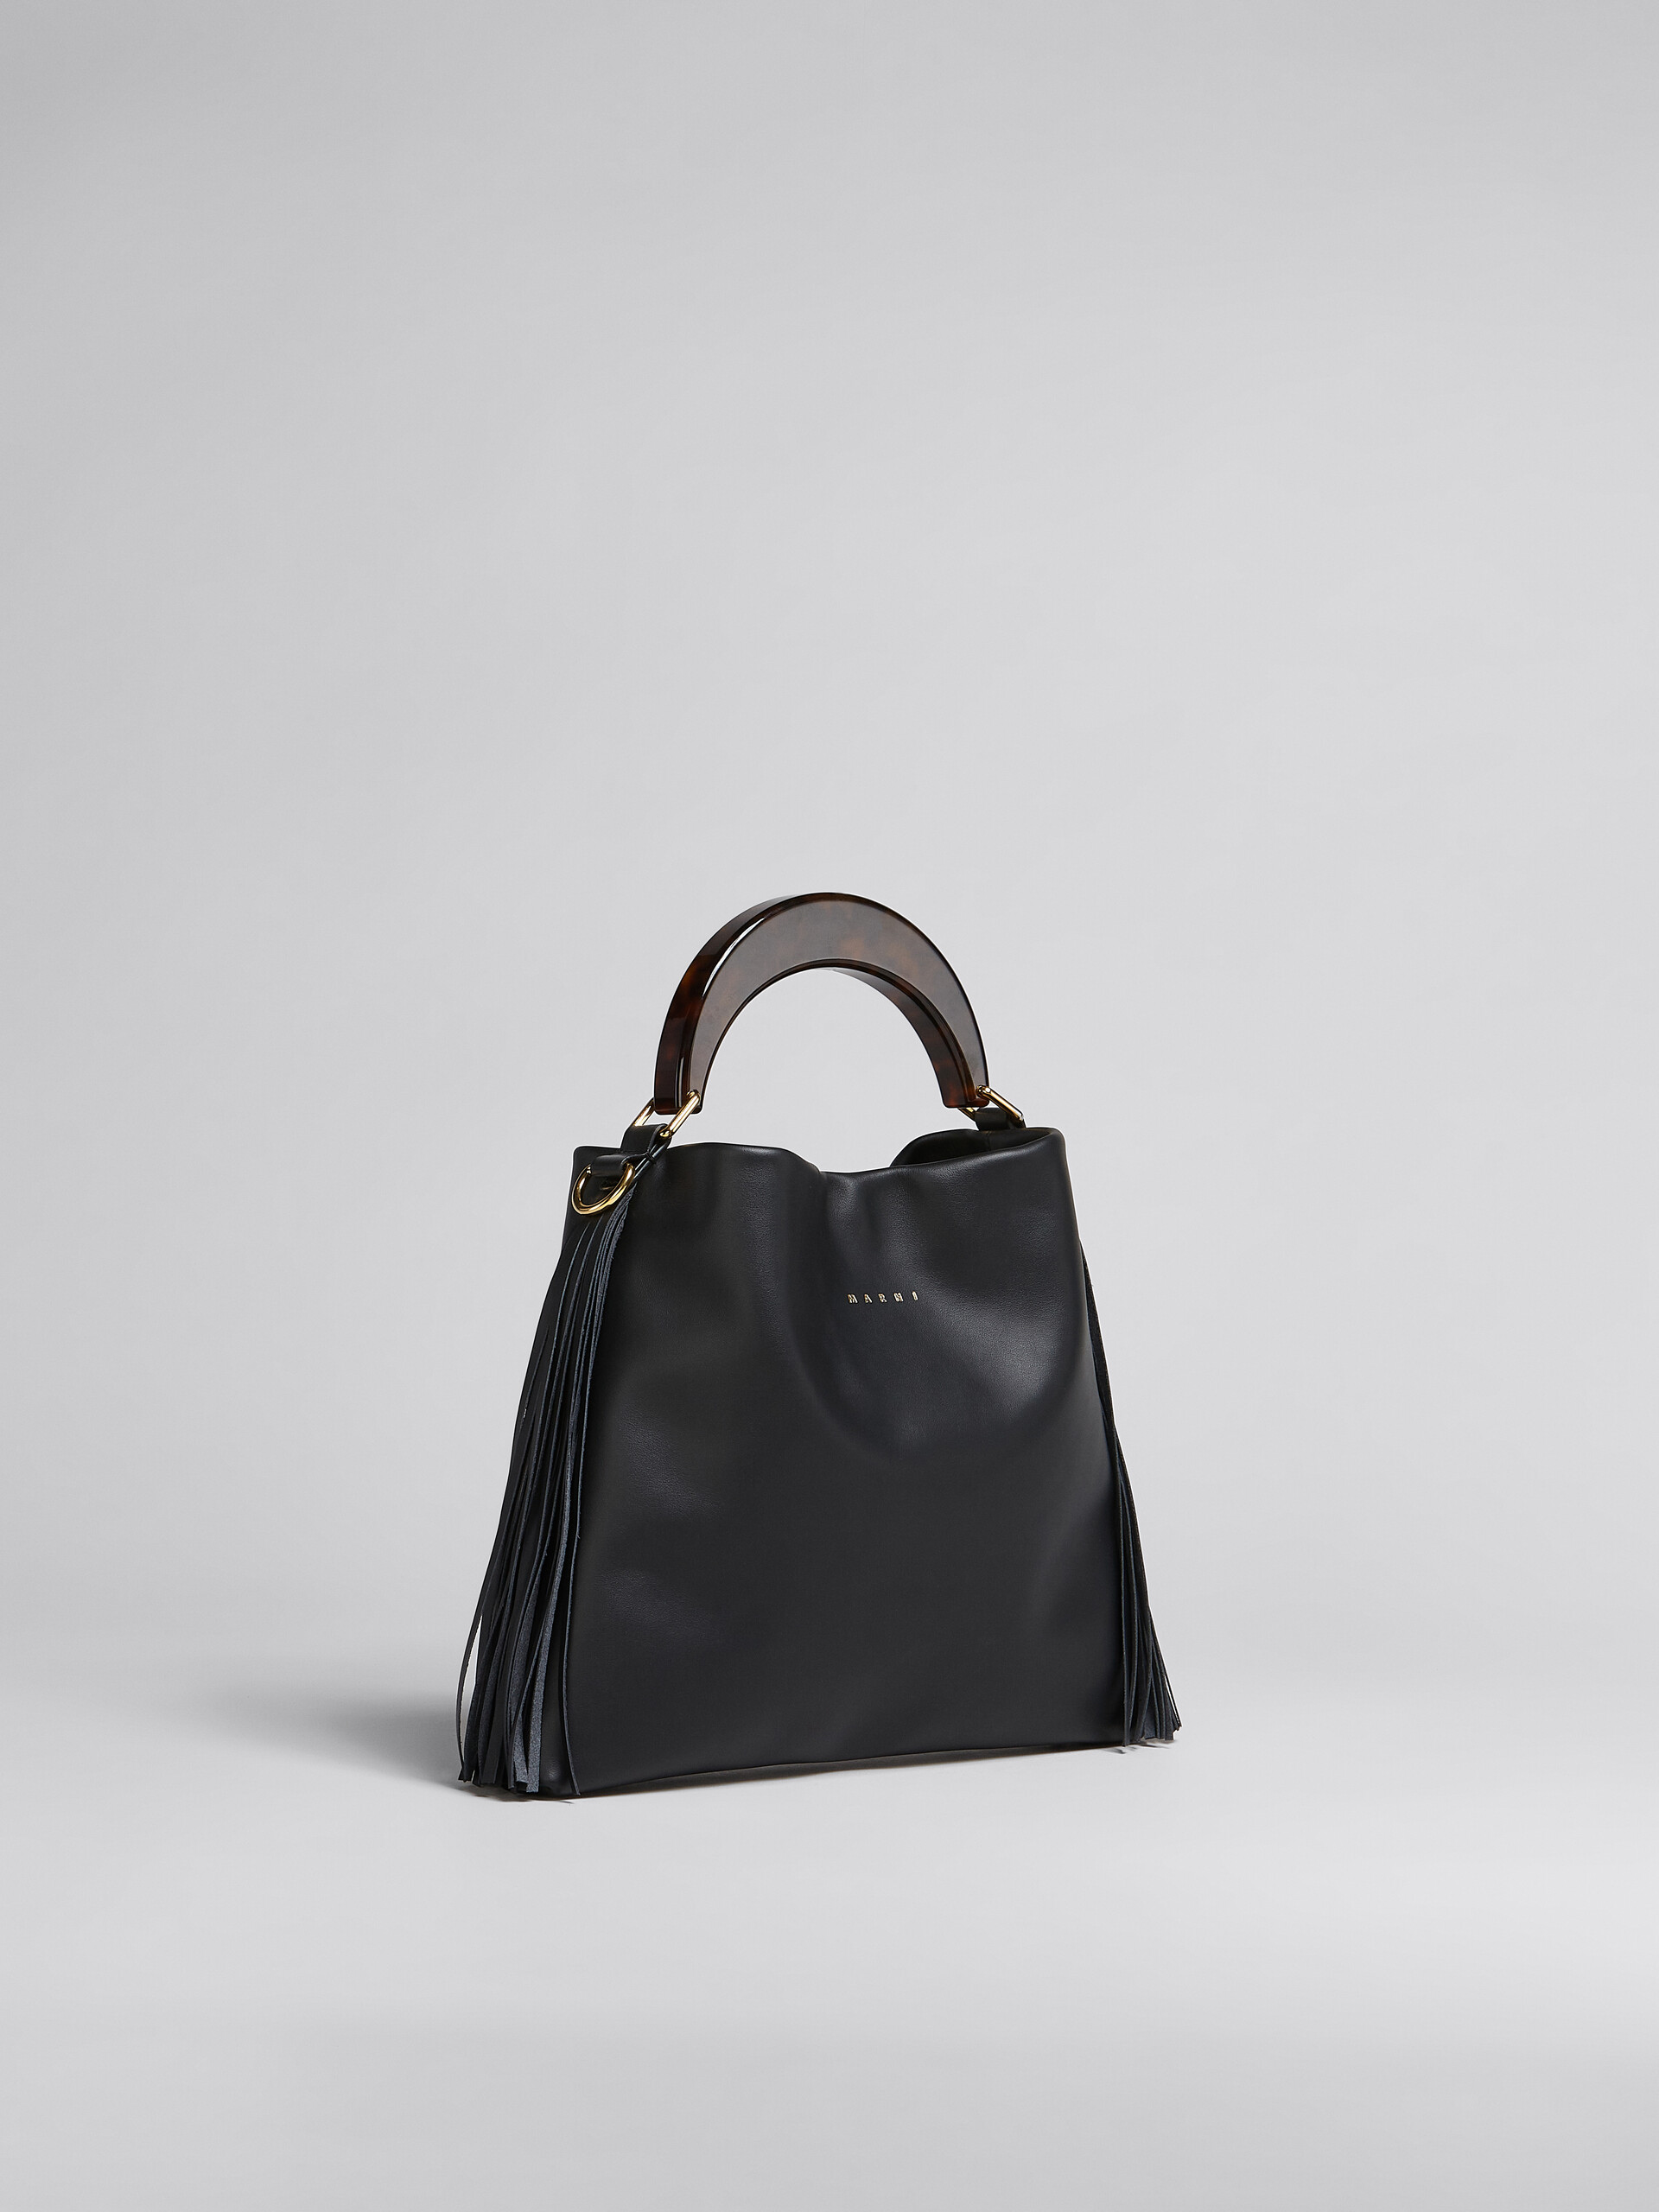 Venice Small Bag in black leather with fringes - Shoulder Bags - Image 6